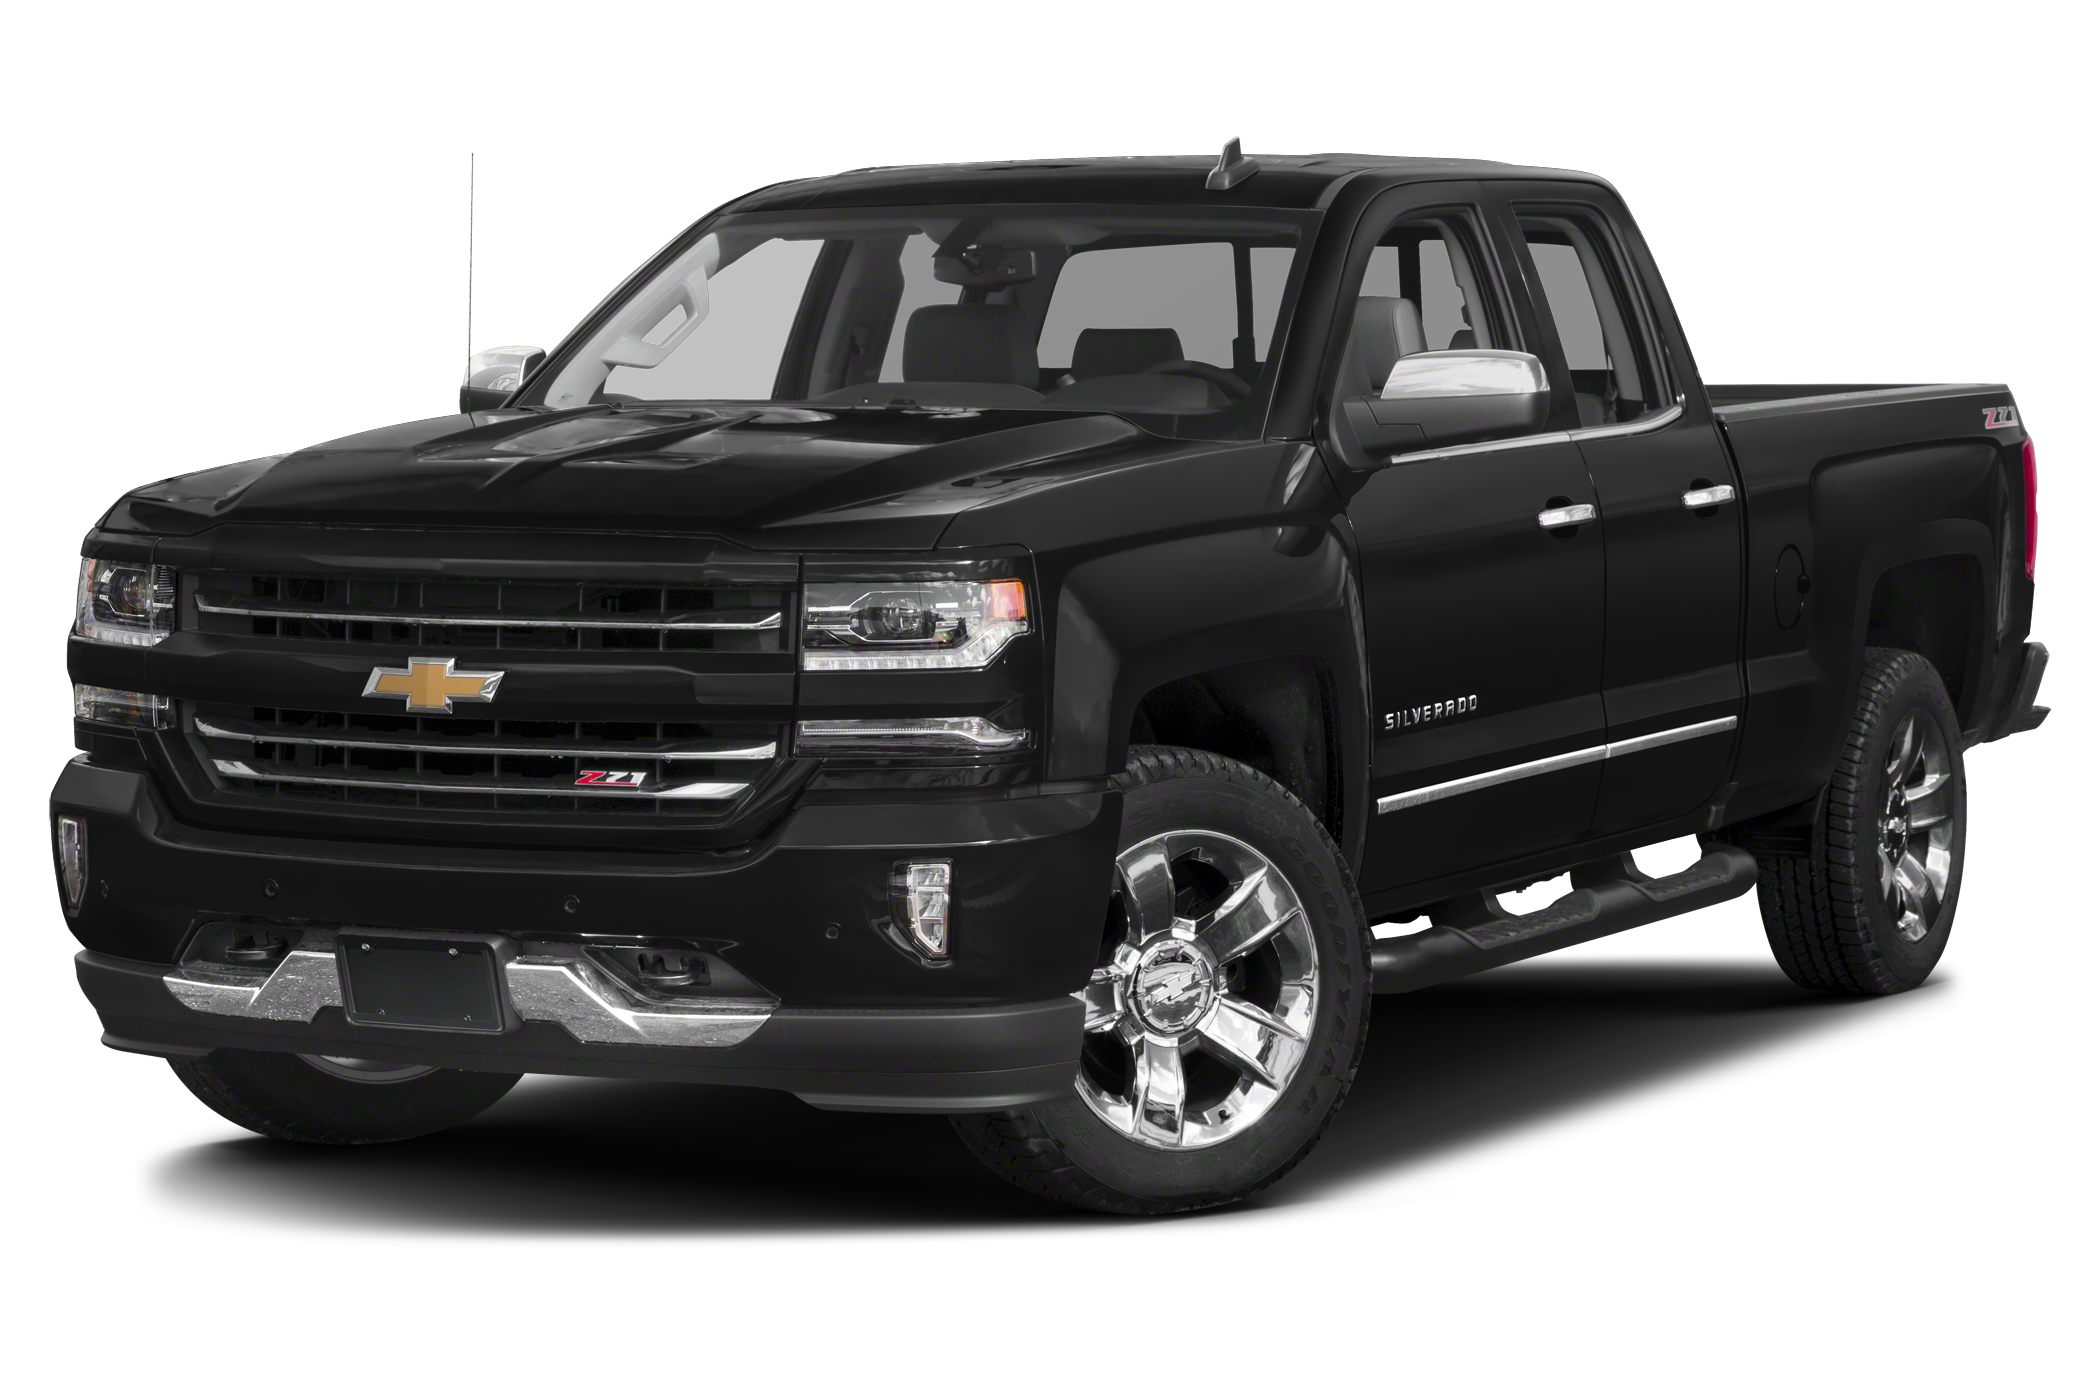 2017 Chevrolet Silverado 1500 LTZ w/1LZ 4x4 Double Cab 6.6 ft. box 143.5  in. WB Pricing and Options